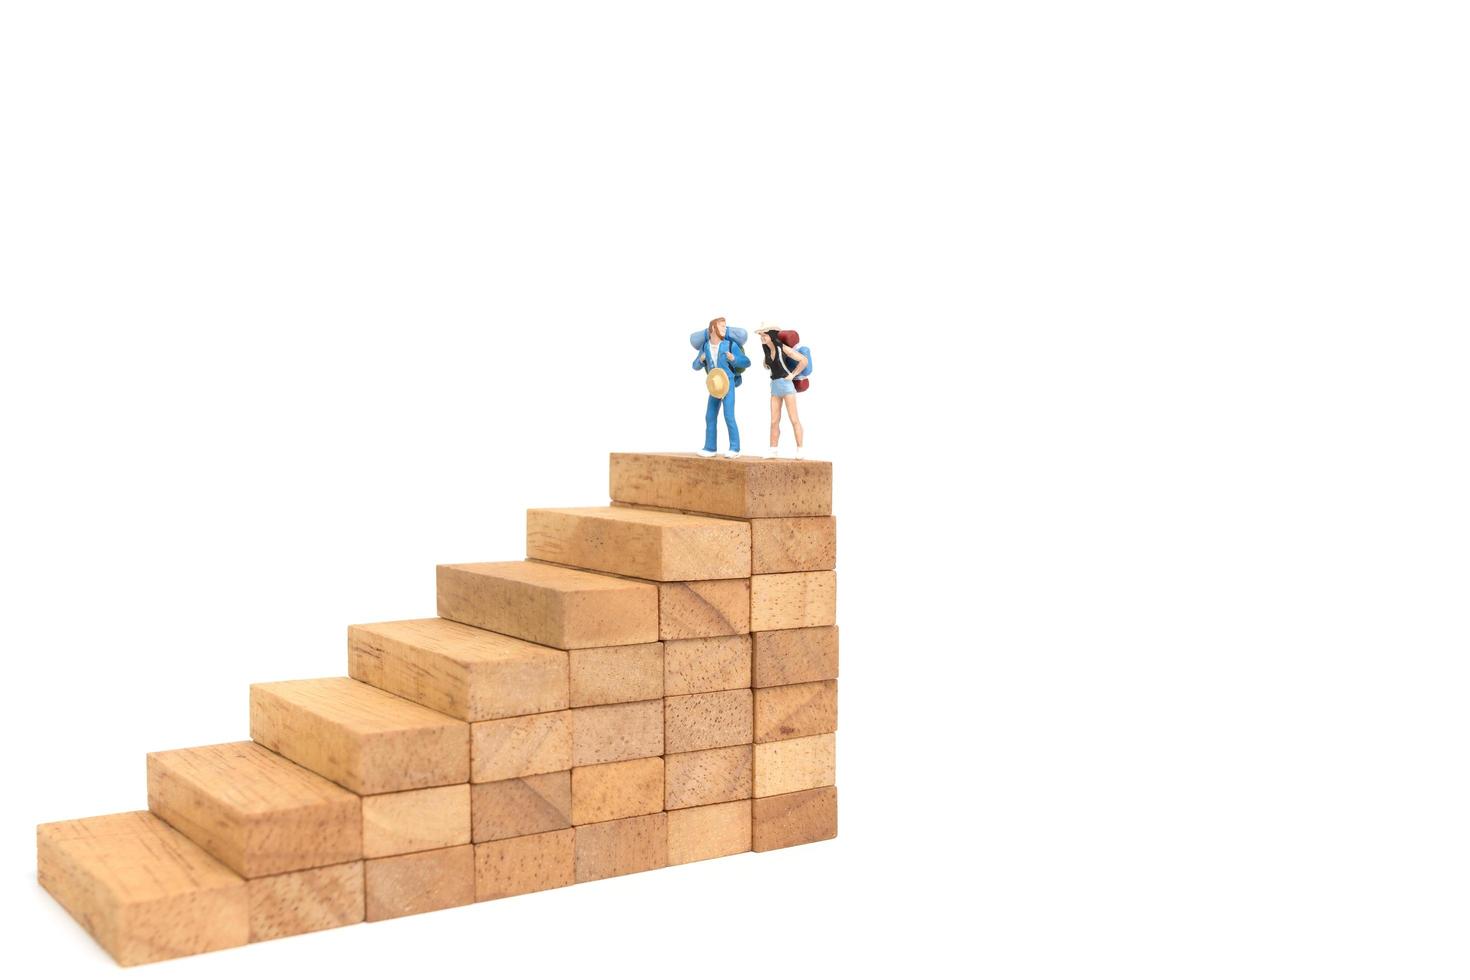 Miniature backpackers standing on wood blocks isolated on a white background, travel concept photo